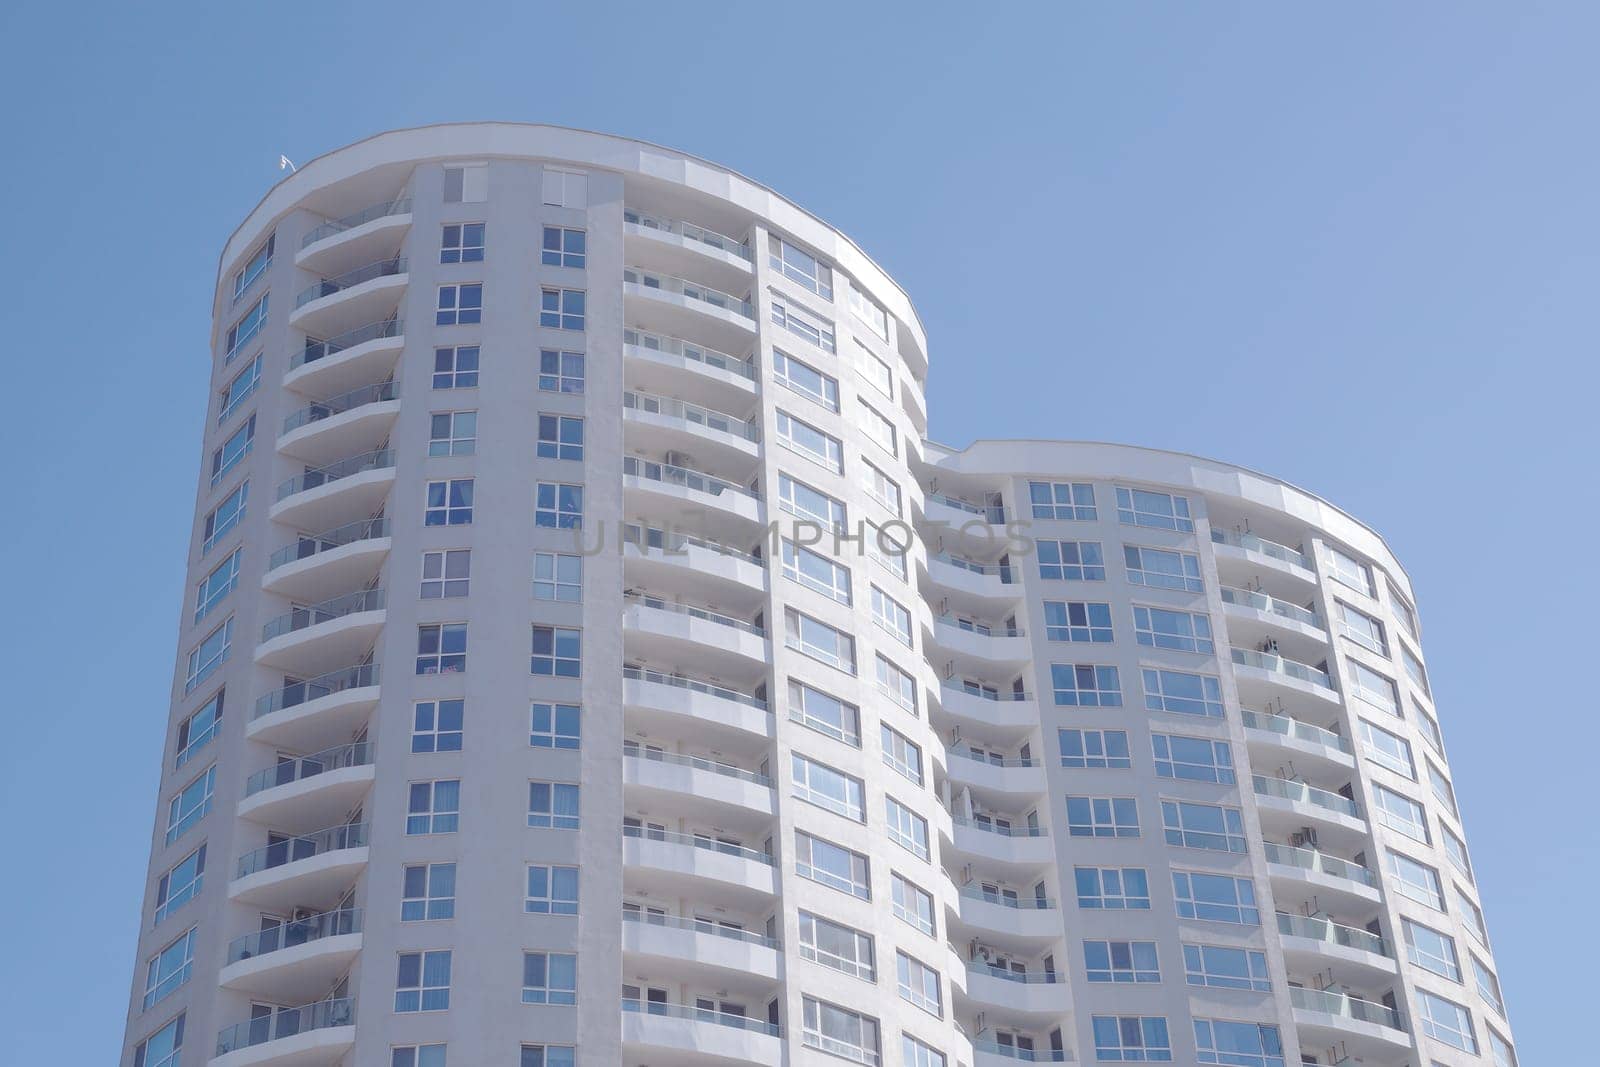 Burgas, Bulgaria - March 23, 2024: Modern high-rise residential building with curved balconies against a blue sky